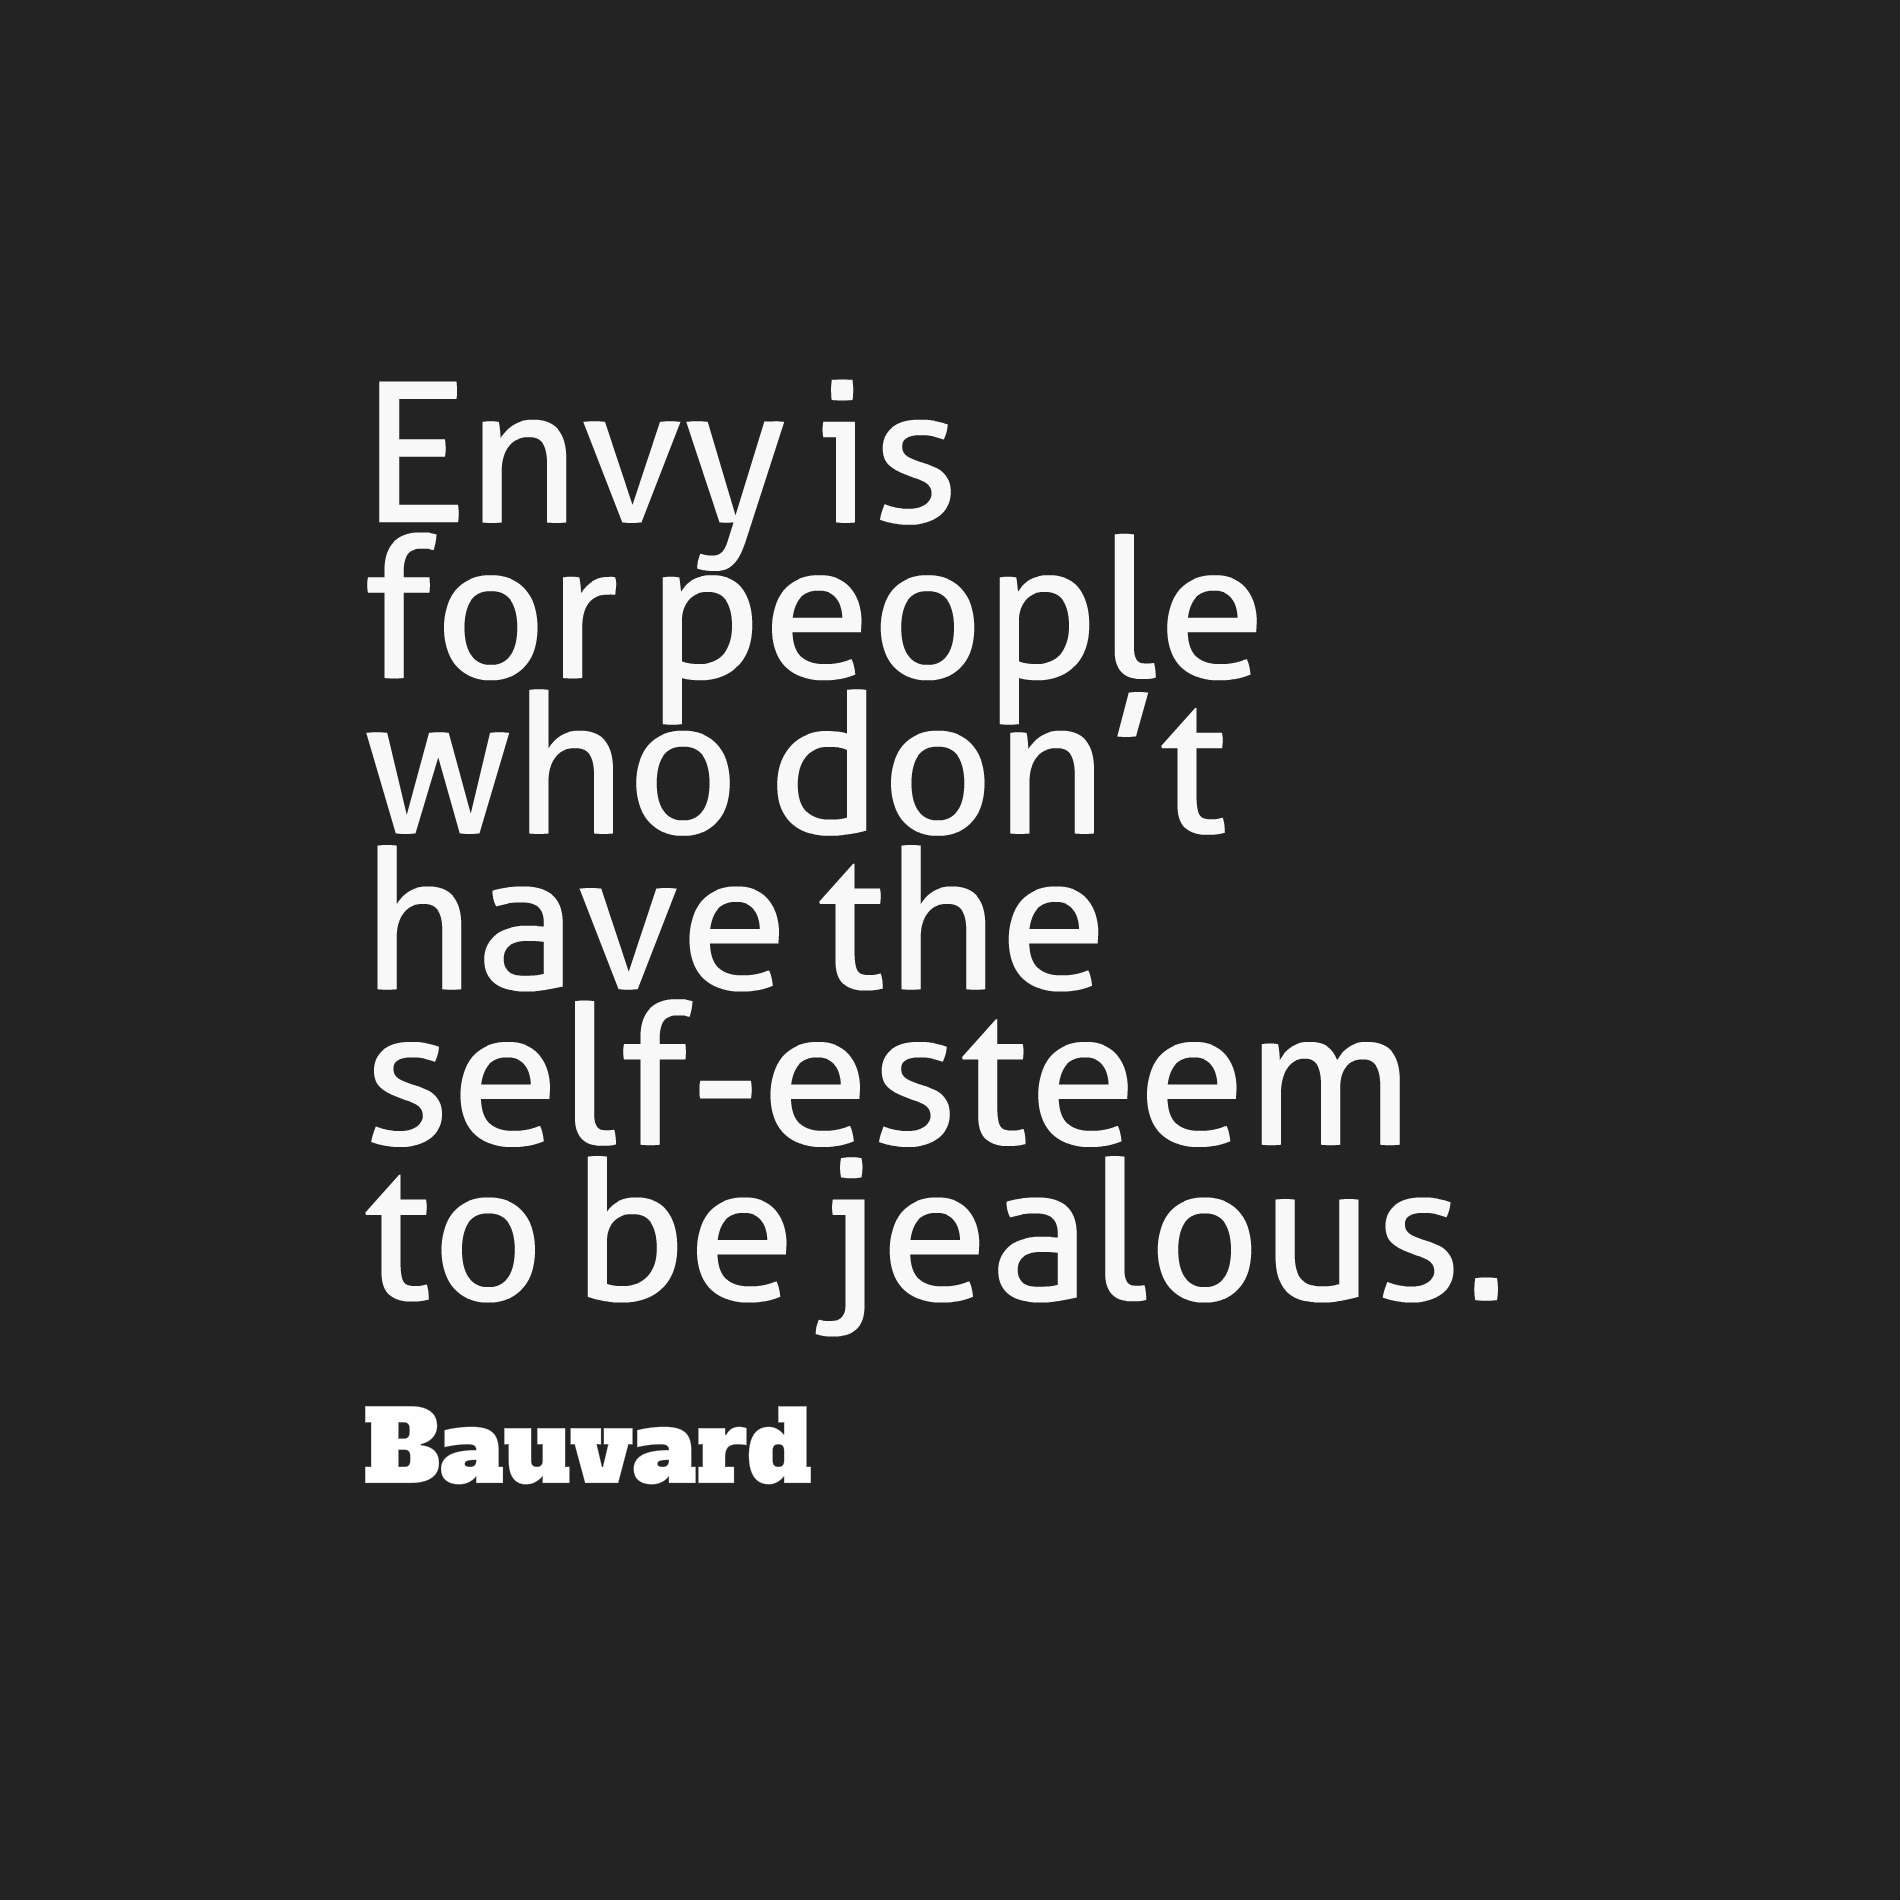 Envy is for people who don’t have the self-esteem to be jealous.